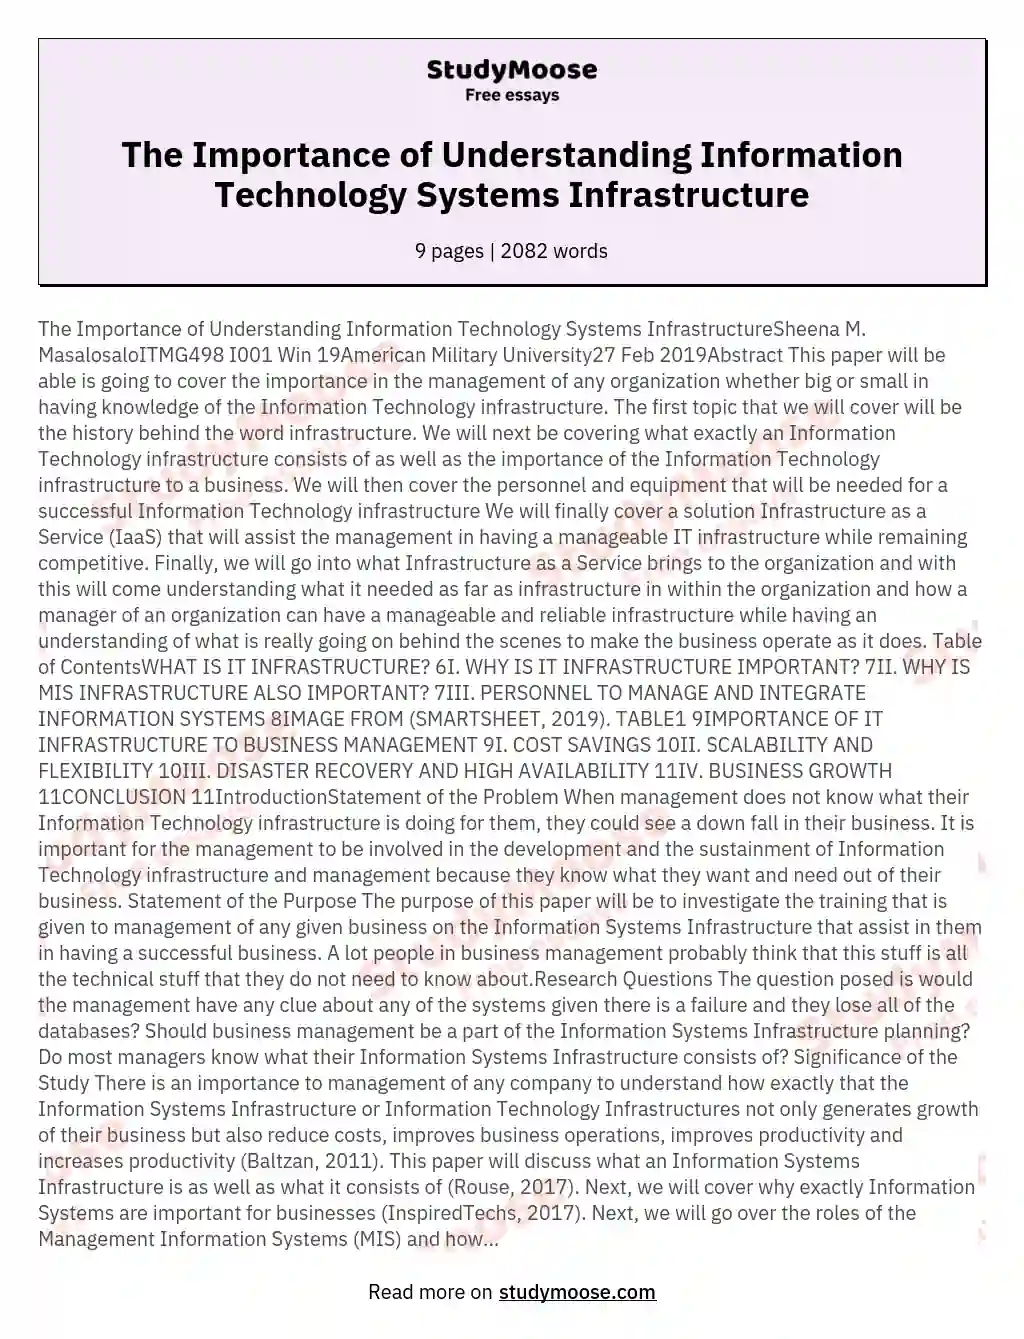 The Importance of Understanding Information Technology Systems Infrastructure essay